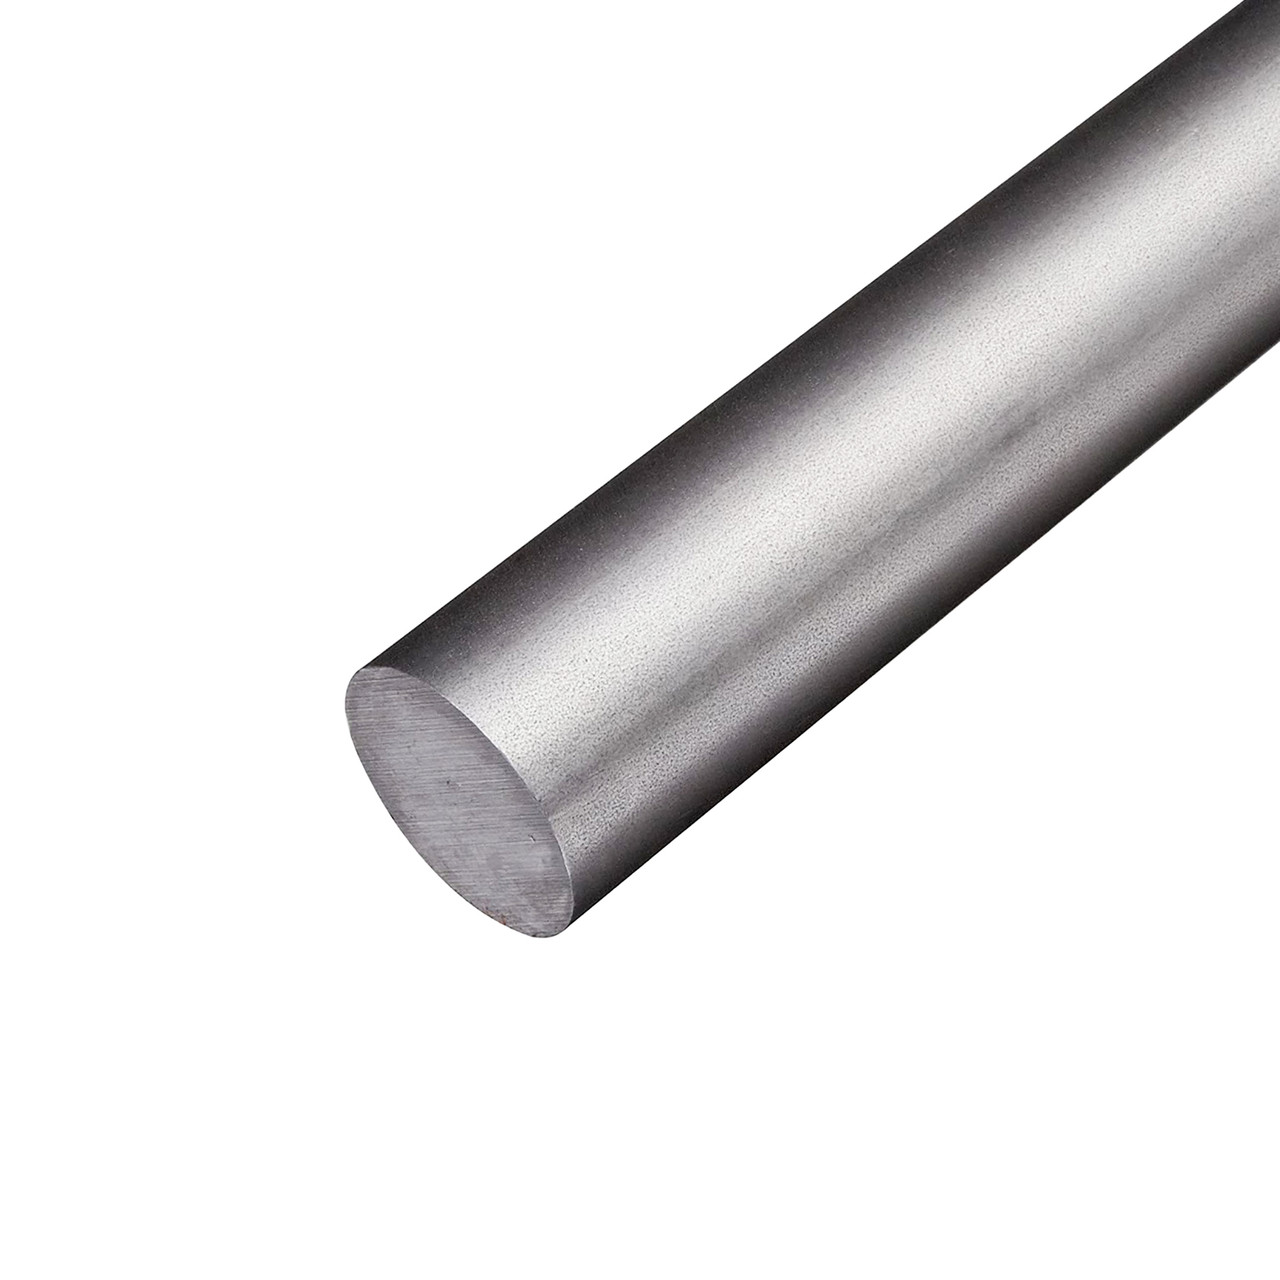 0.687 (11/16 inch) x 10 inches, 8620 Alloy Steel Round Rod, Cold Finished